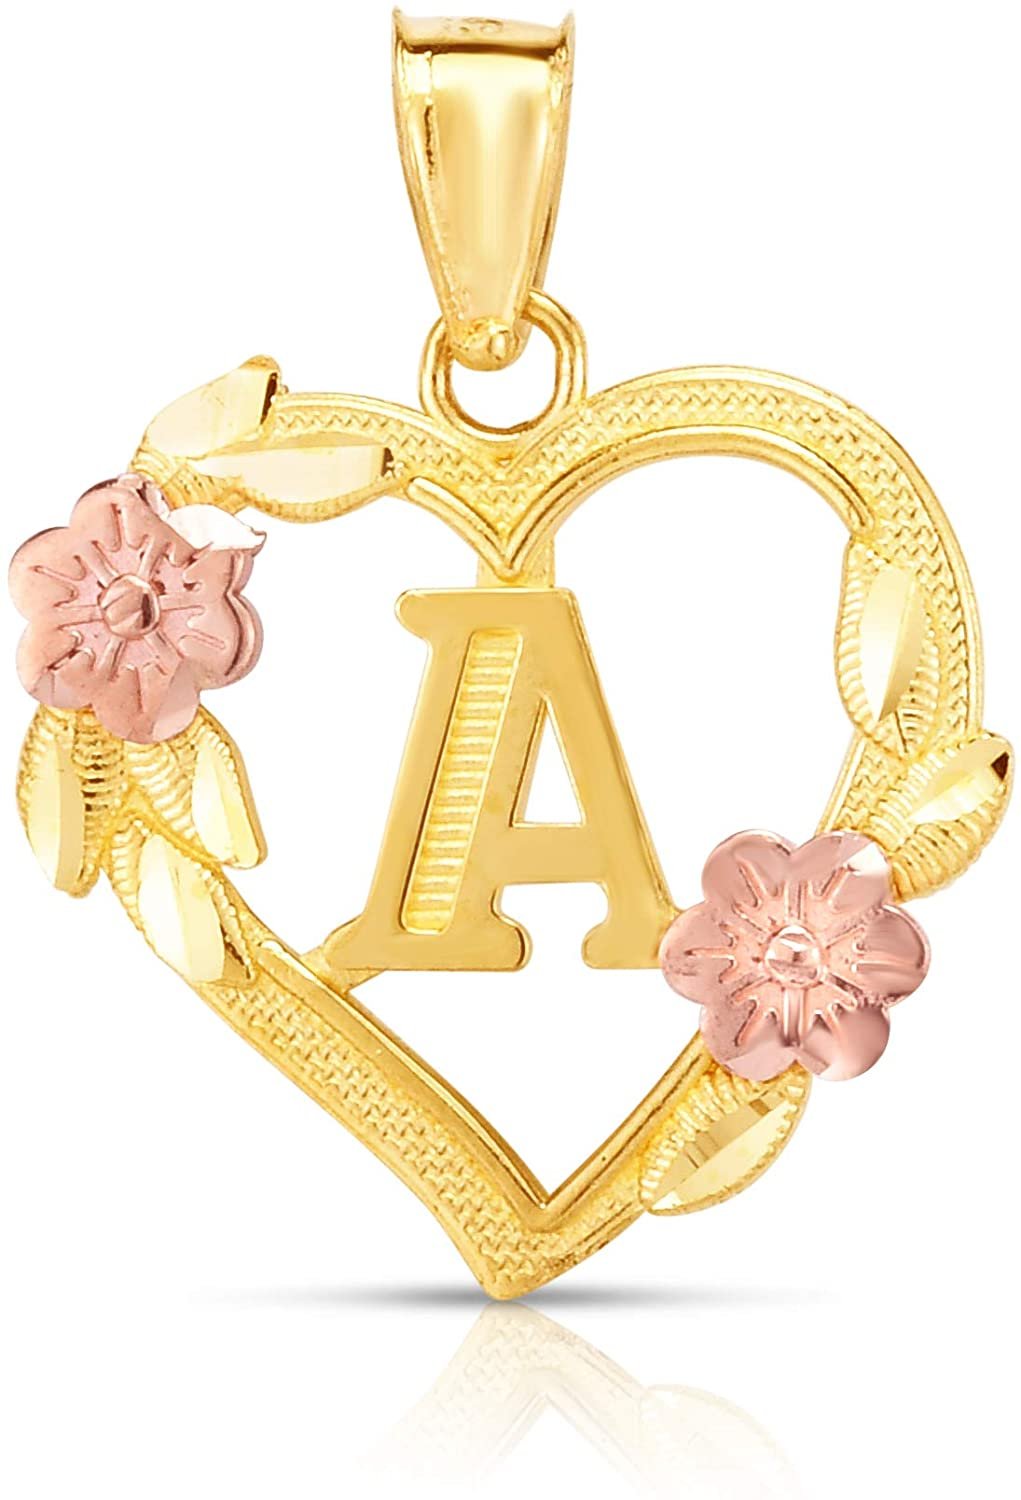 10k Yellow and Rose Gold A-Z Initial Heart Pendant with Optional Necklace